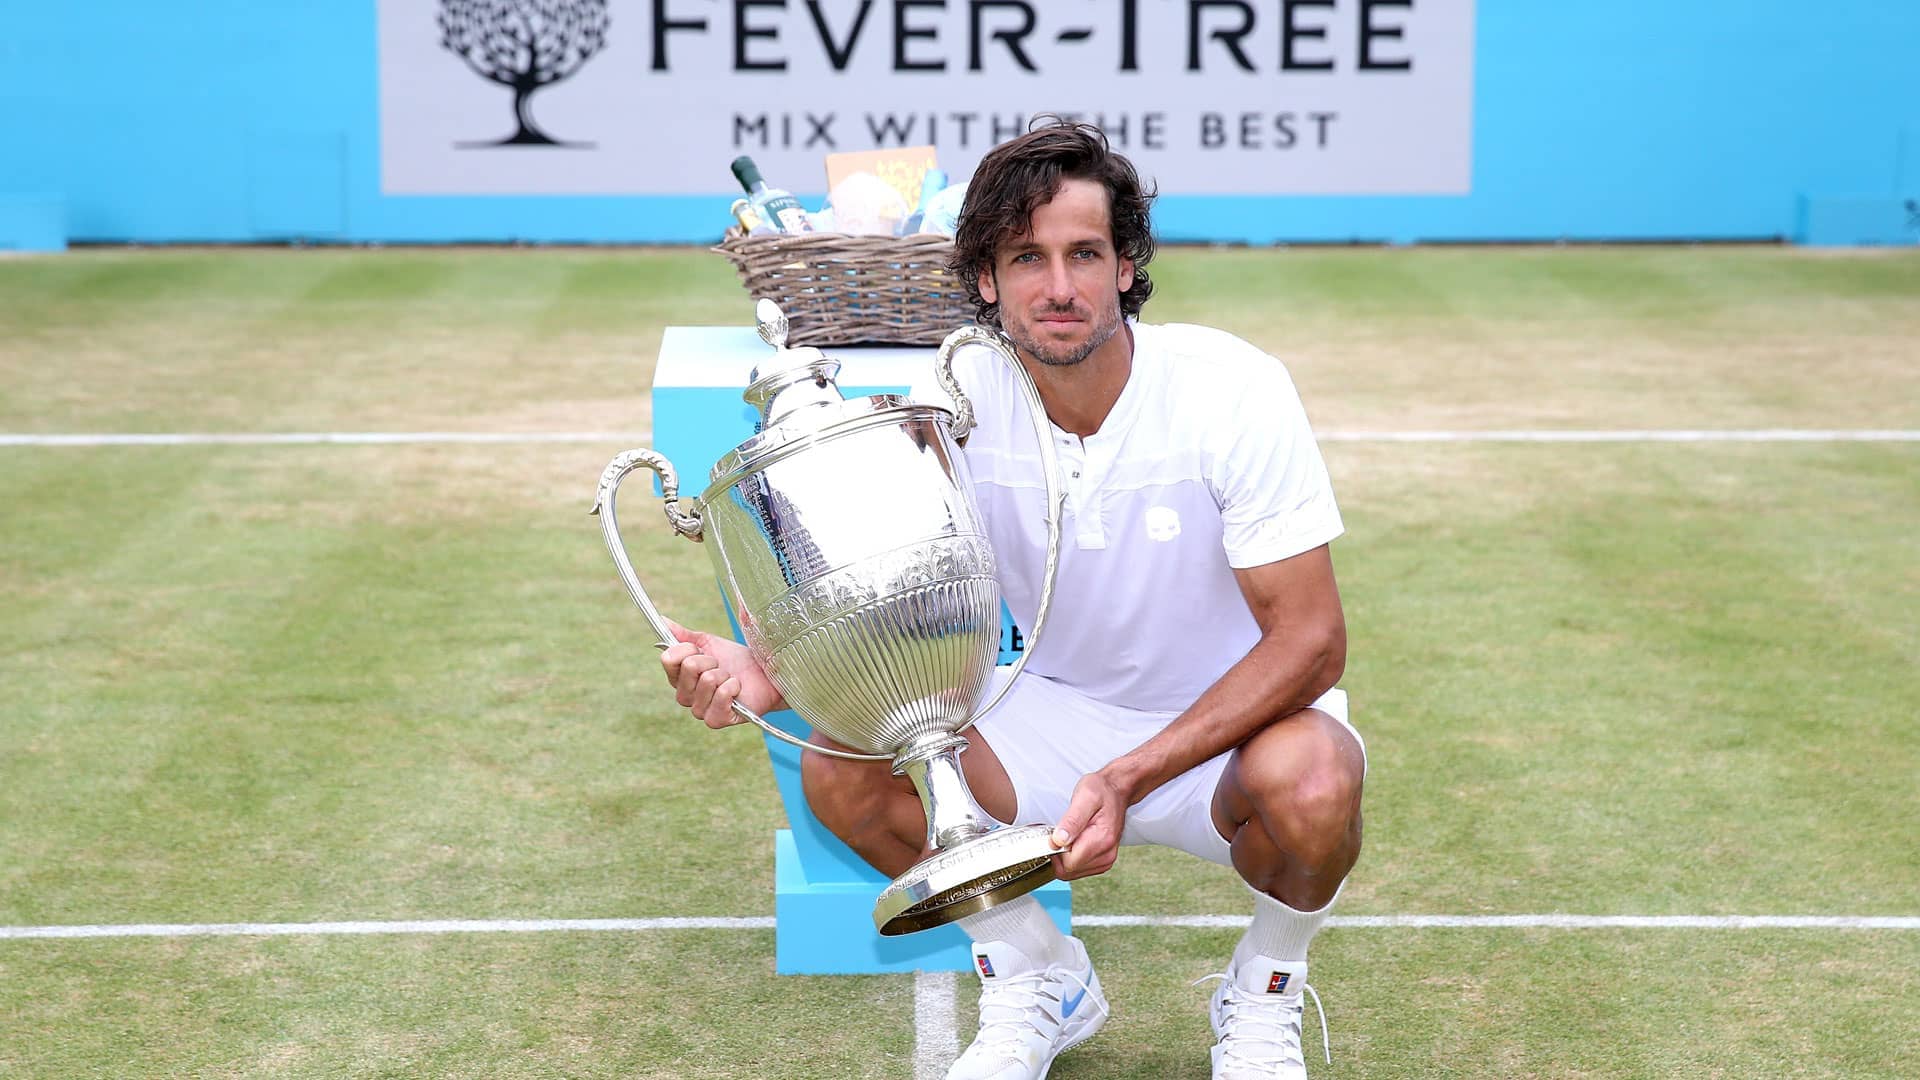 <a href='https://www.atptour.com/en/players/feliciano-lopez/l397/overview'>Feliciano Lopez</a> holds the Queen's Club 2019 winner's trophy